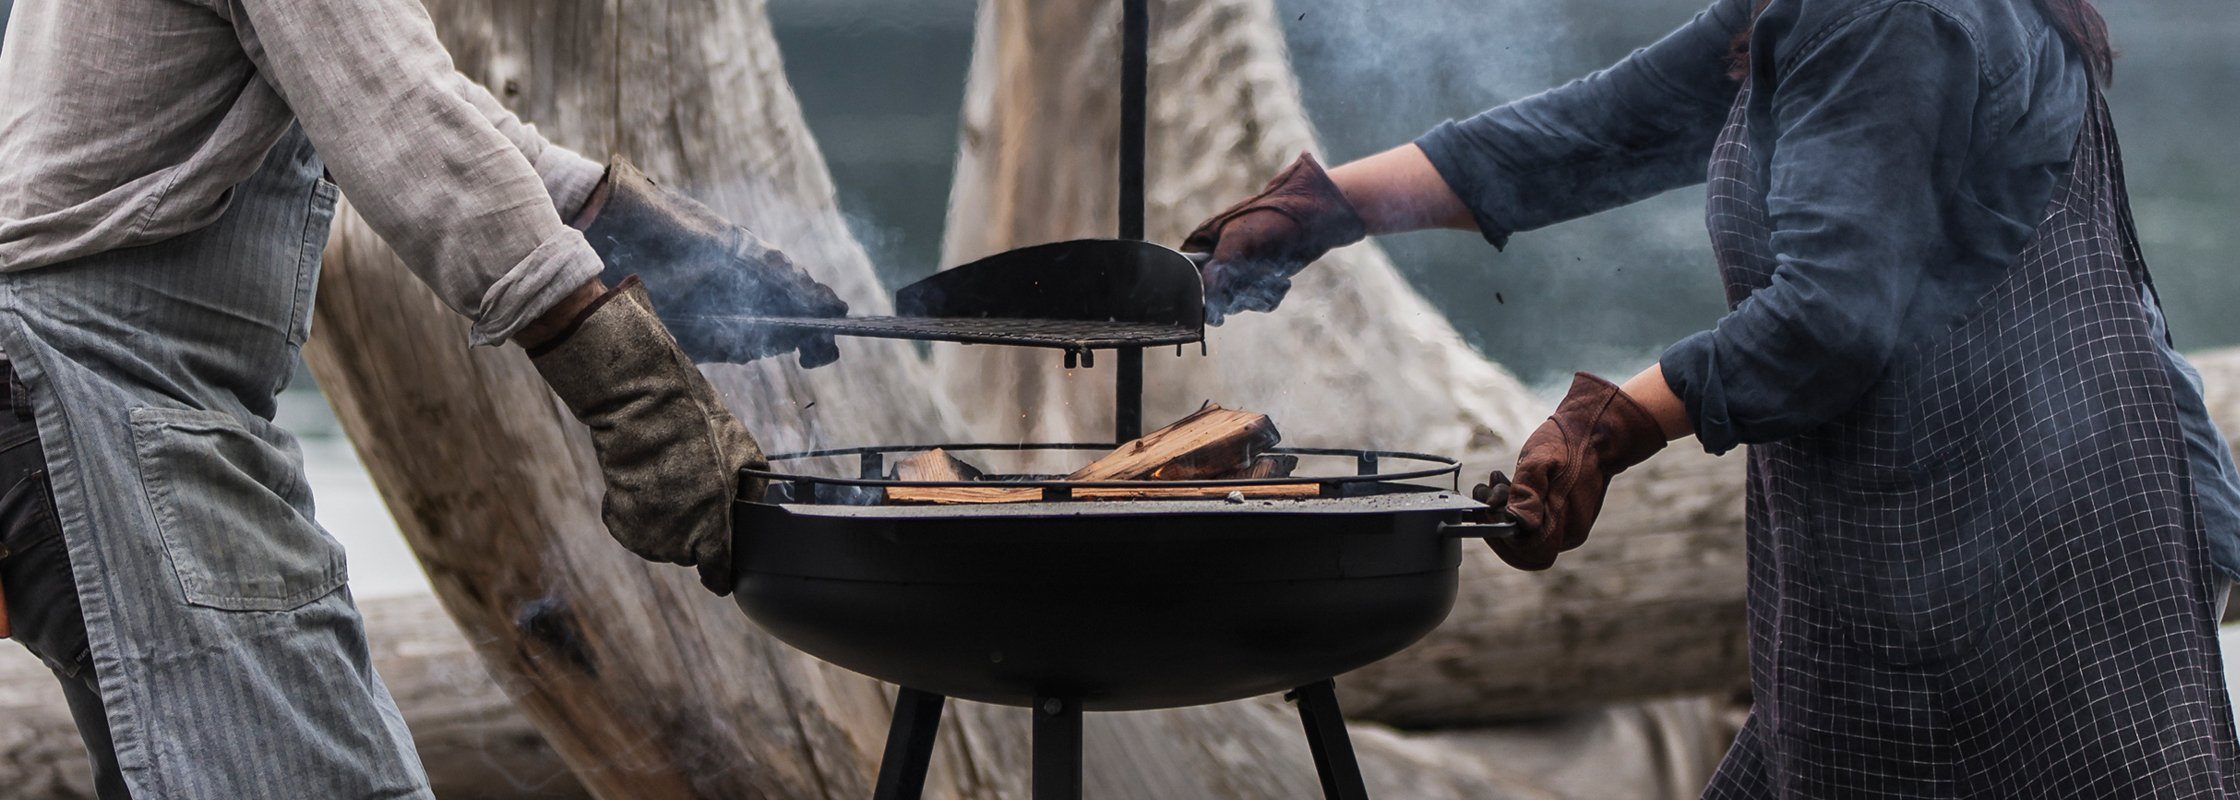 Price-Leader Open Fire Cooking Equipment & Tools – GET LOST, campfire  cooking equipment 